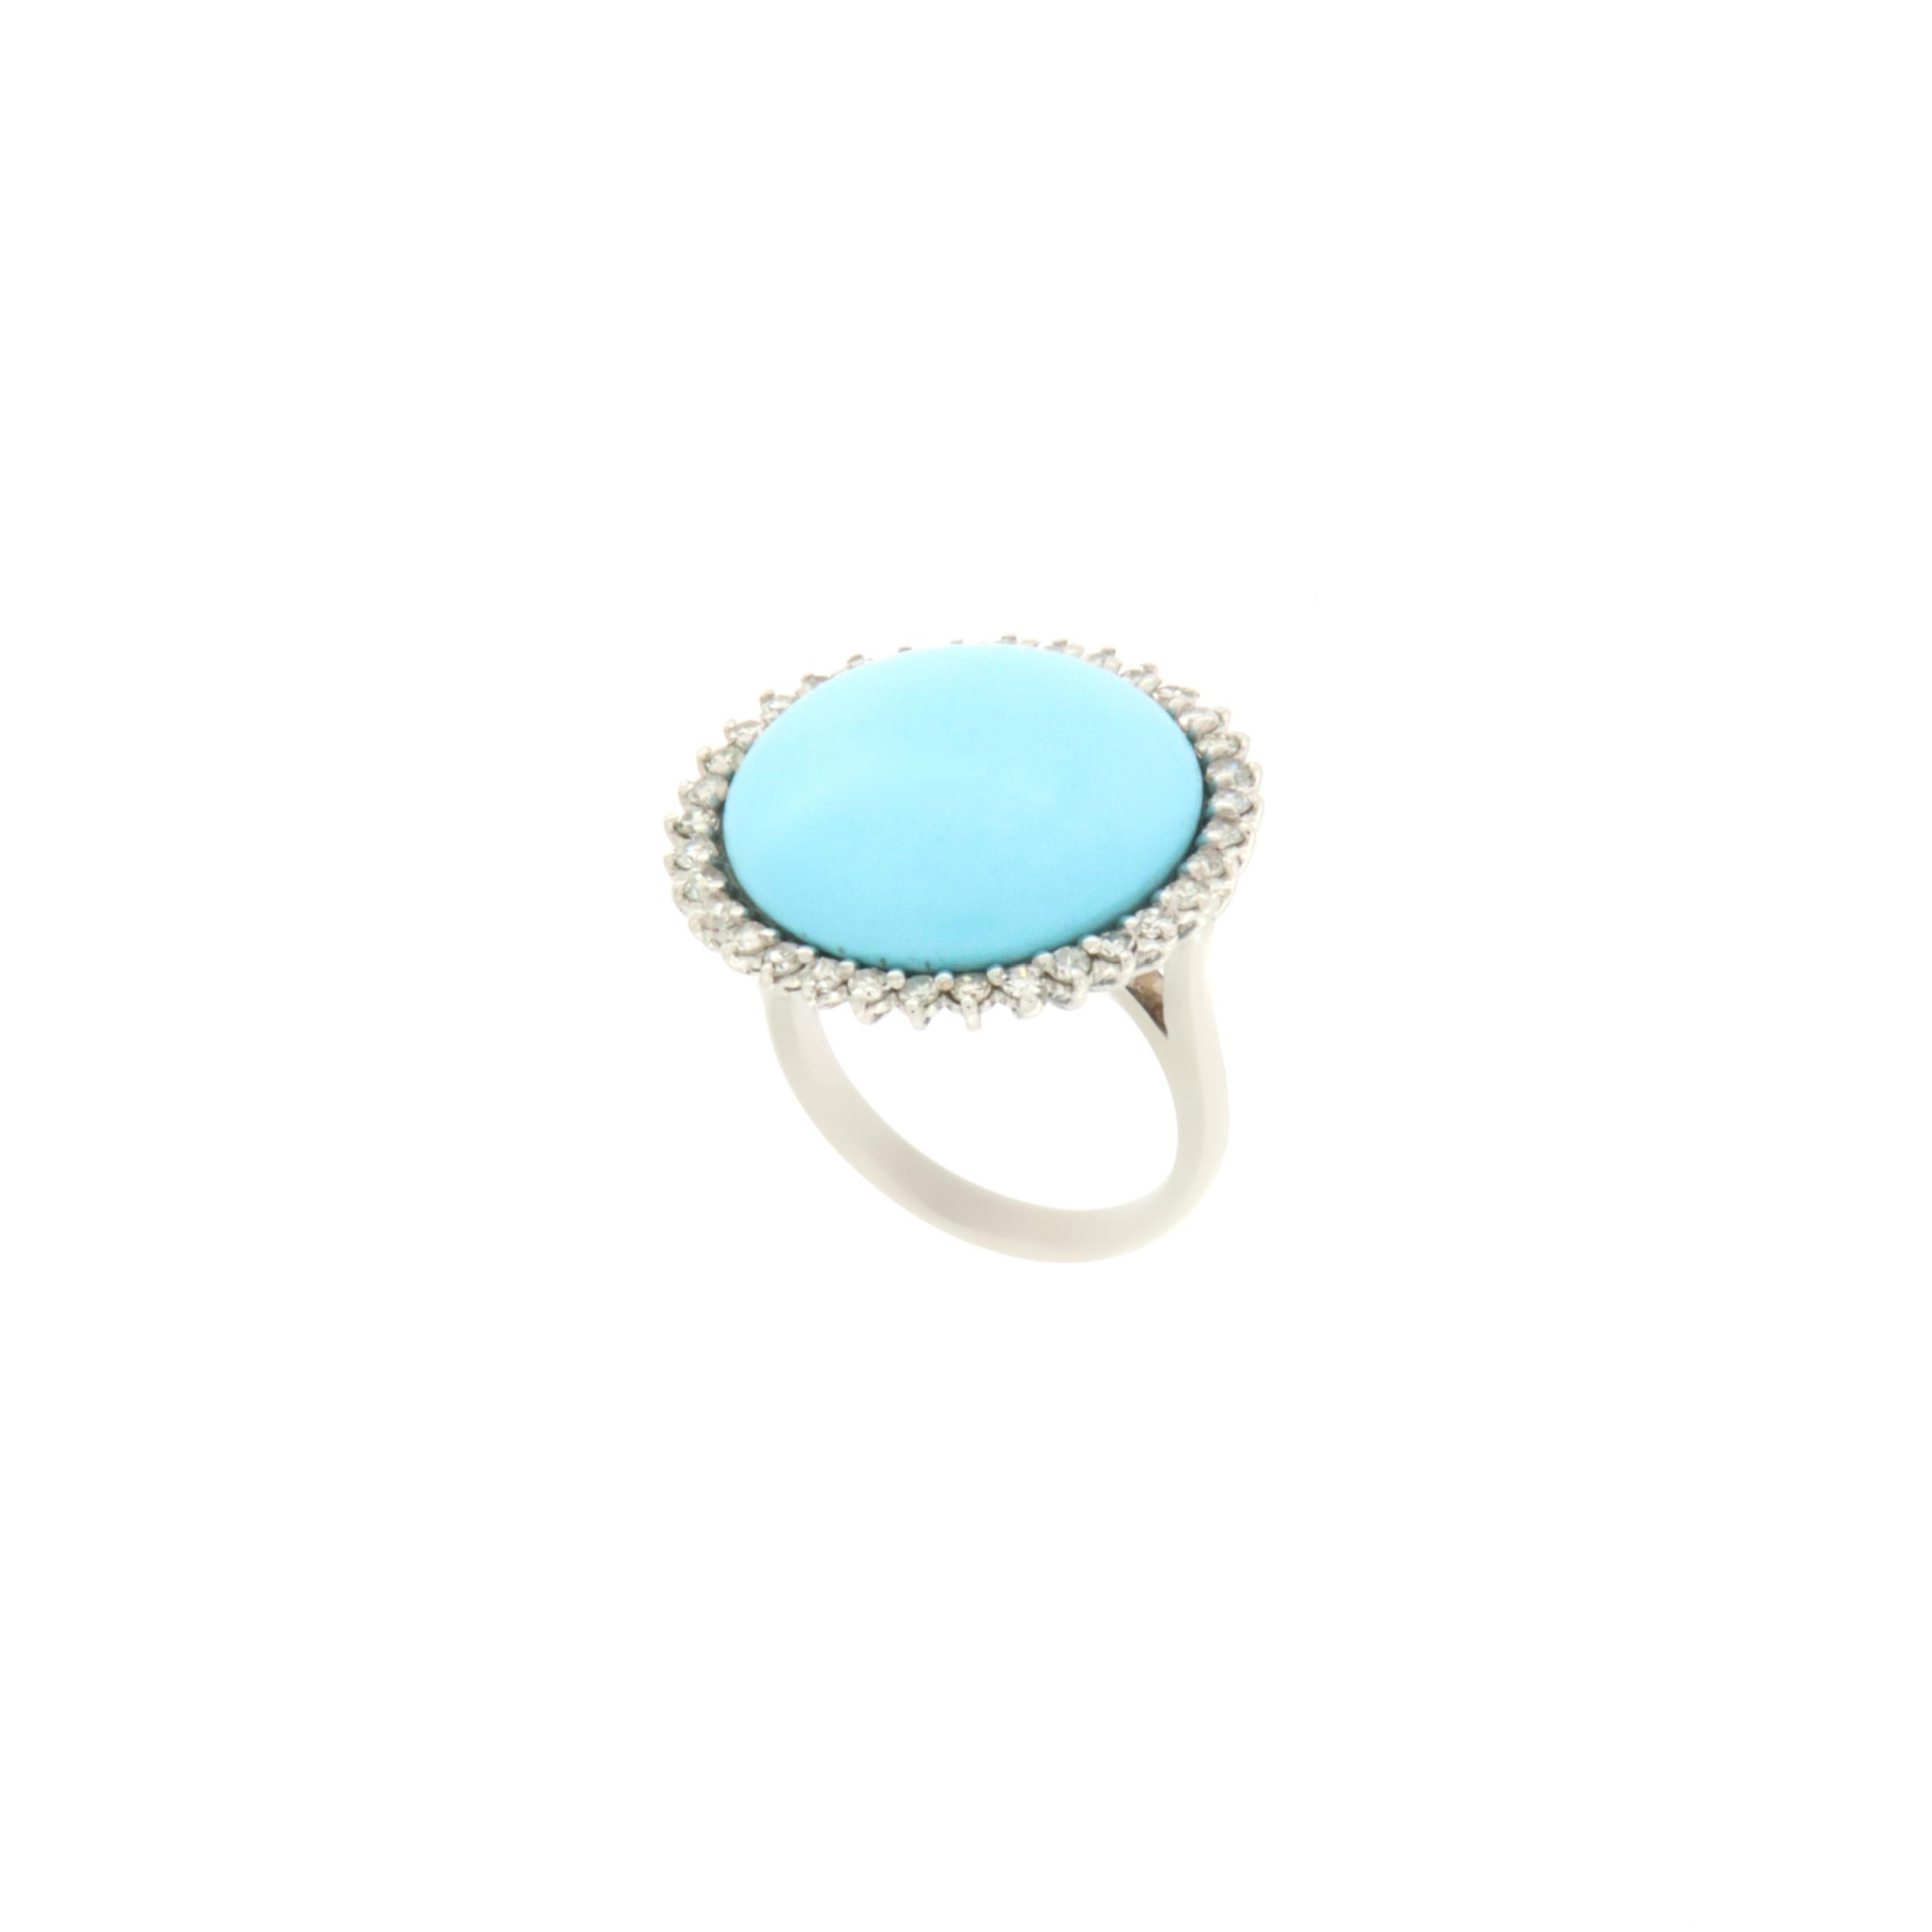 18 Karat white gold cocktail ring. Handmade by our craftsmen and assembled with natural turquoise and diamonds.

Diamonds weight 0.76 karat
Turquoise weight 3.50 grams
Ring total weight 10.30 grams
Ring size ITA 15 - US 7.50
(all rings are can be